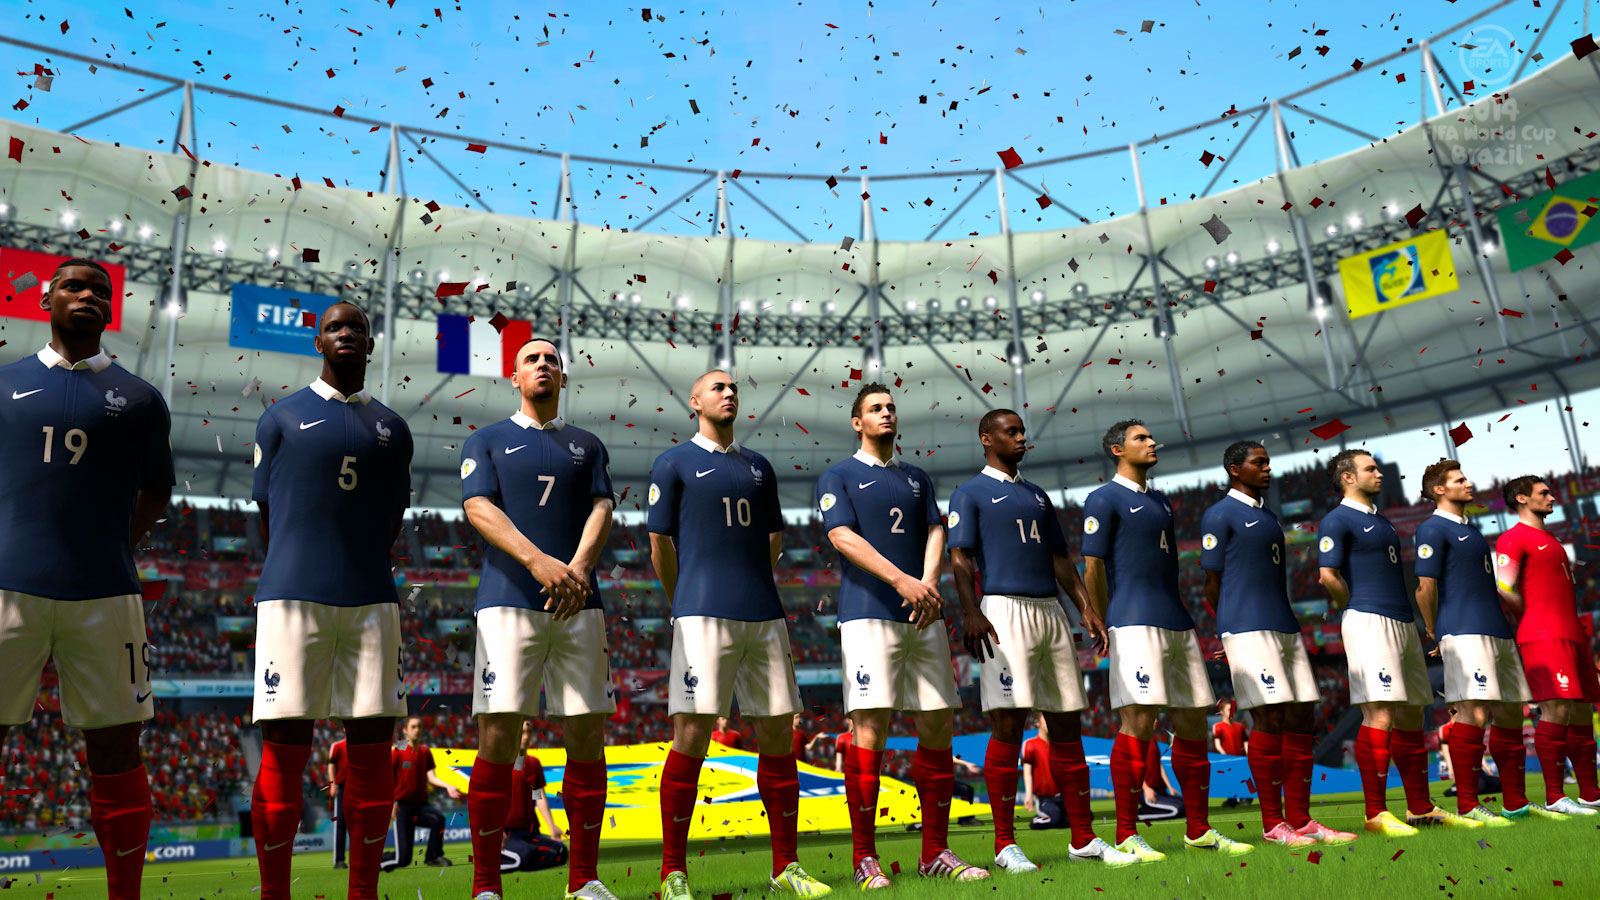 Xbox One, PS4, and PC not getting FIFA World Cup game, devs explain why  UPDATE